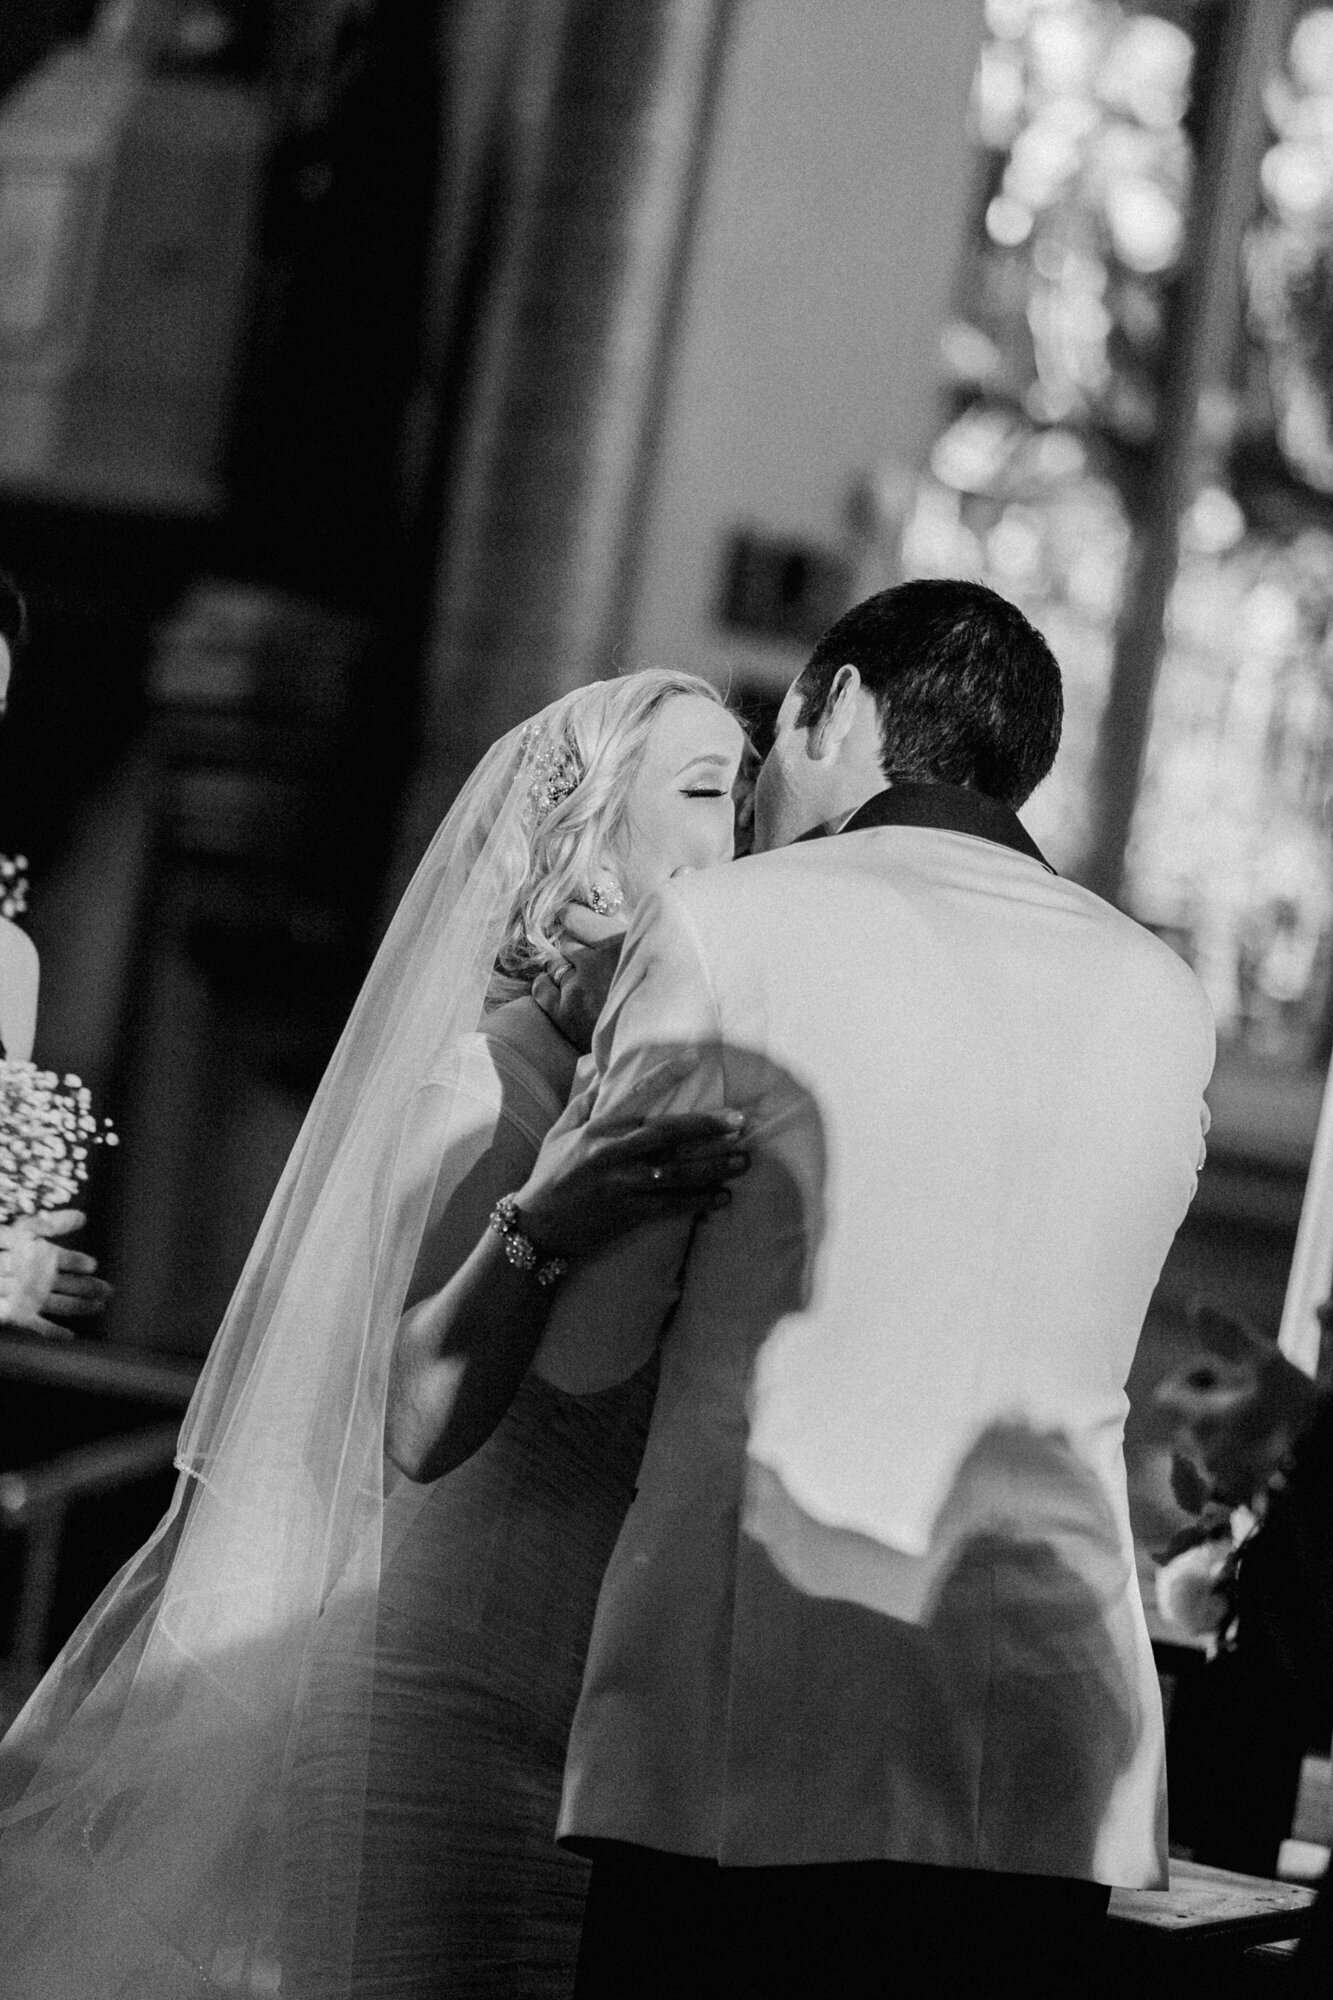 A beautiful black and white photograph of a couple sharing their first kiss during their wedding ceremony